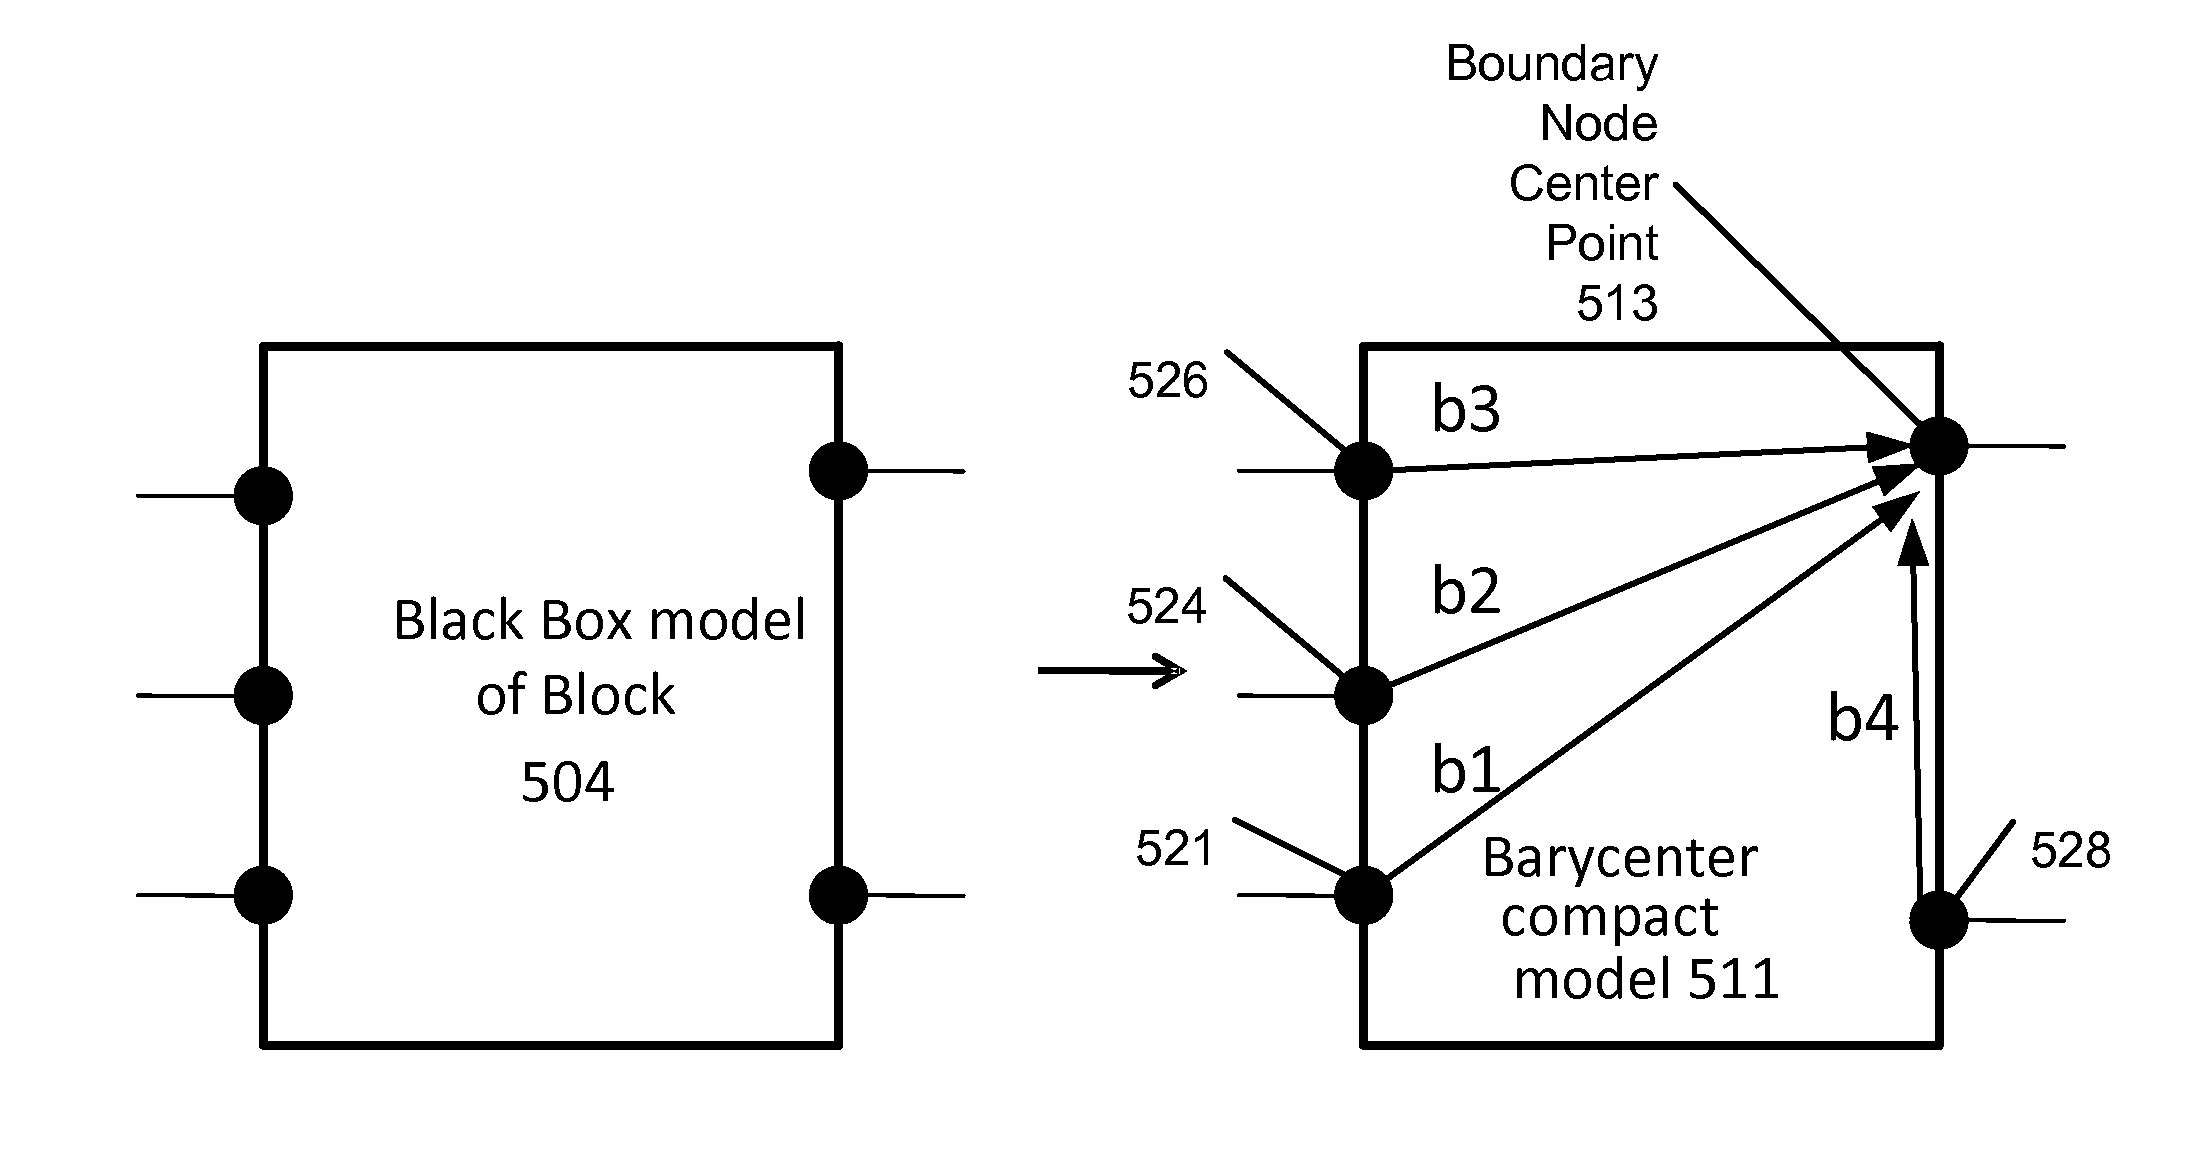 Solving a hierarchical circuit network using a Barycenter compact model